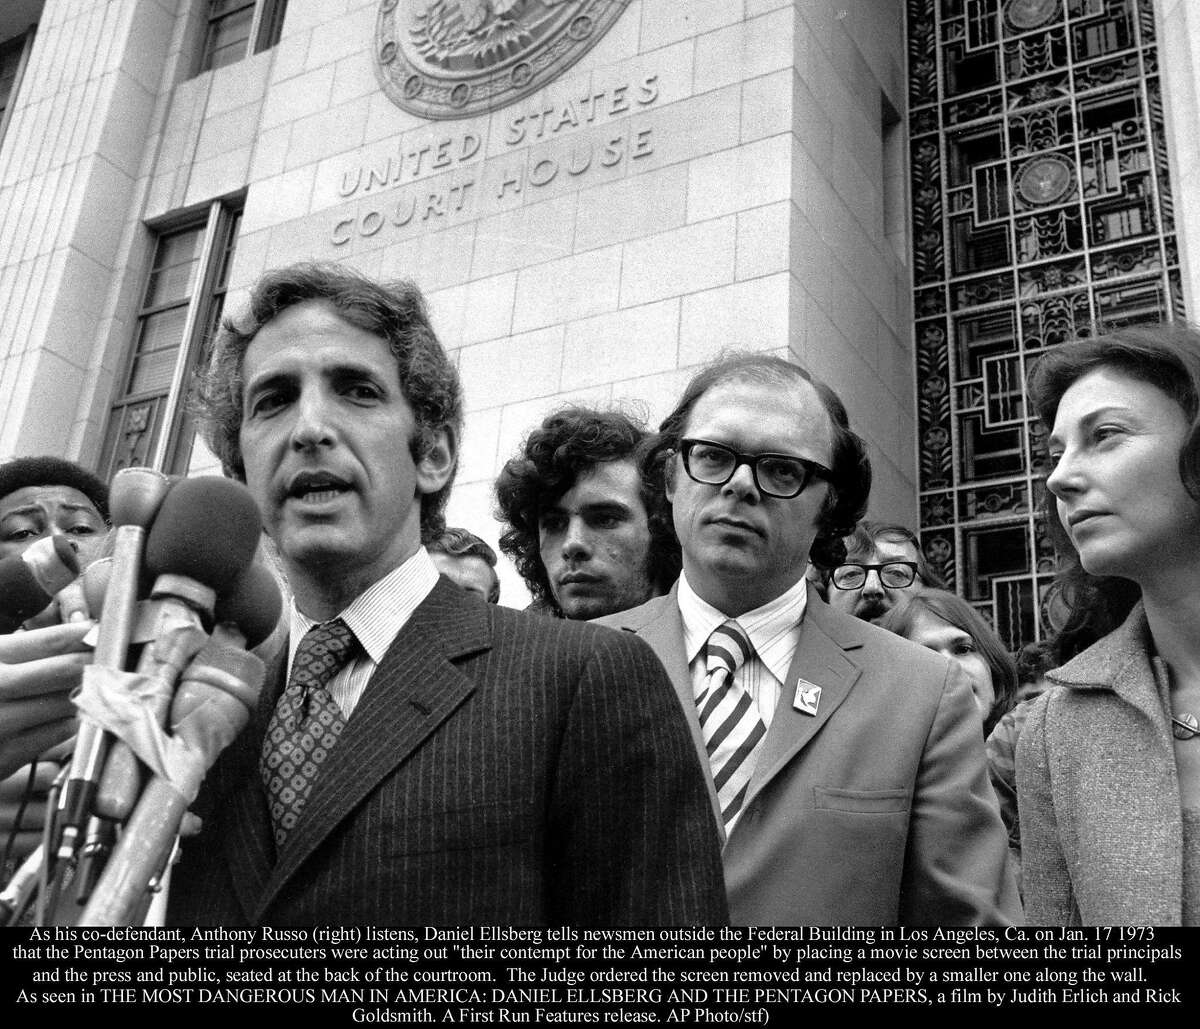 As his co-defendant, Anthony Russo (right) listens, Daniel Ellsberg tells newsmen outside the Federal Building in Los Angeles, Ca. on Jan. 17 1973 that the Pentagon Papers trial prosecutors were acting out "their contempt for the American people" by placing a movie screen between the trial principals and the press and public, seated at the back of the courtroom. The Judge ordered the screen removed and replaced by a smaller one along the wall. (AP Photo/stf) As seen in the Oscar-nominated documentary "THE MOST DANGEROUS MAN IN AMERICA: DANIEL ELLSBERG AND THE PENTAGON PAPERS"